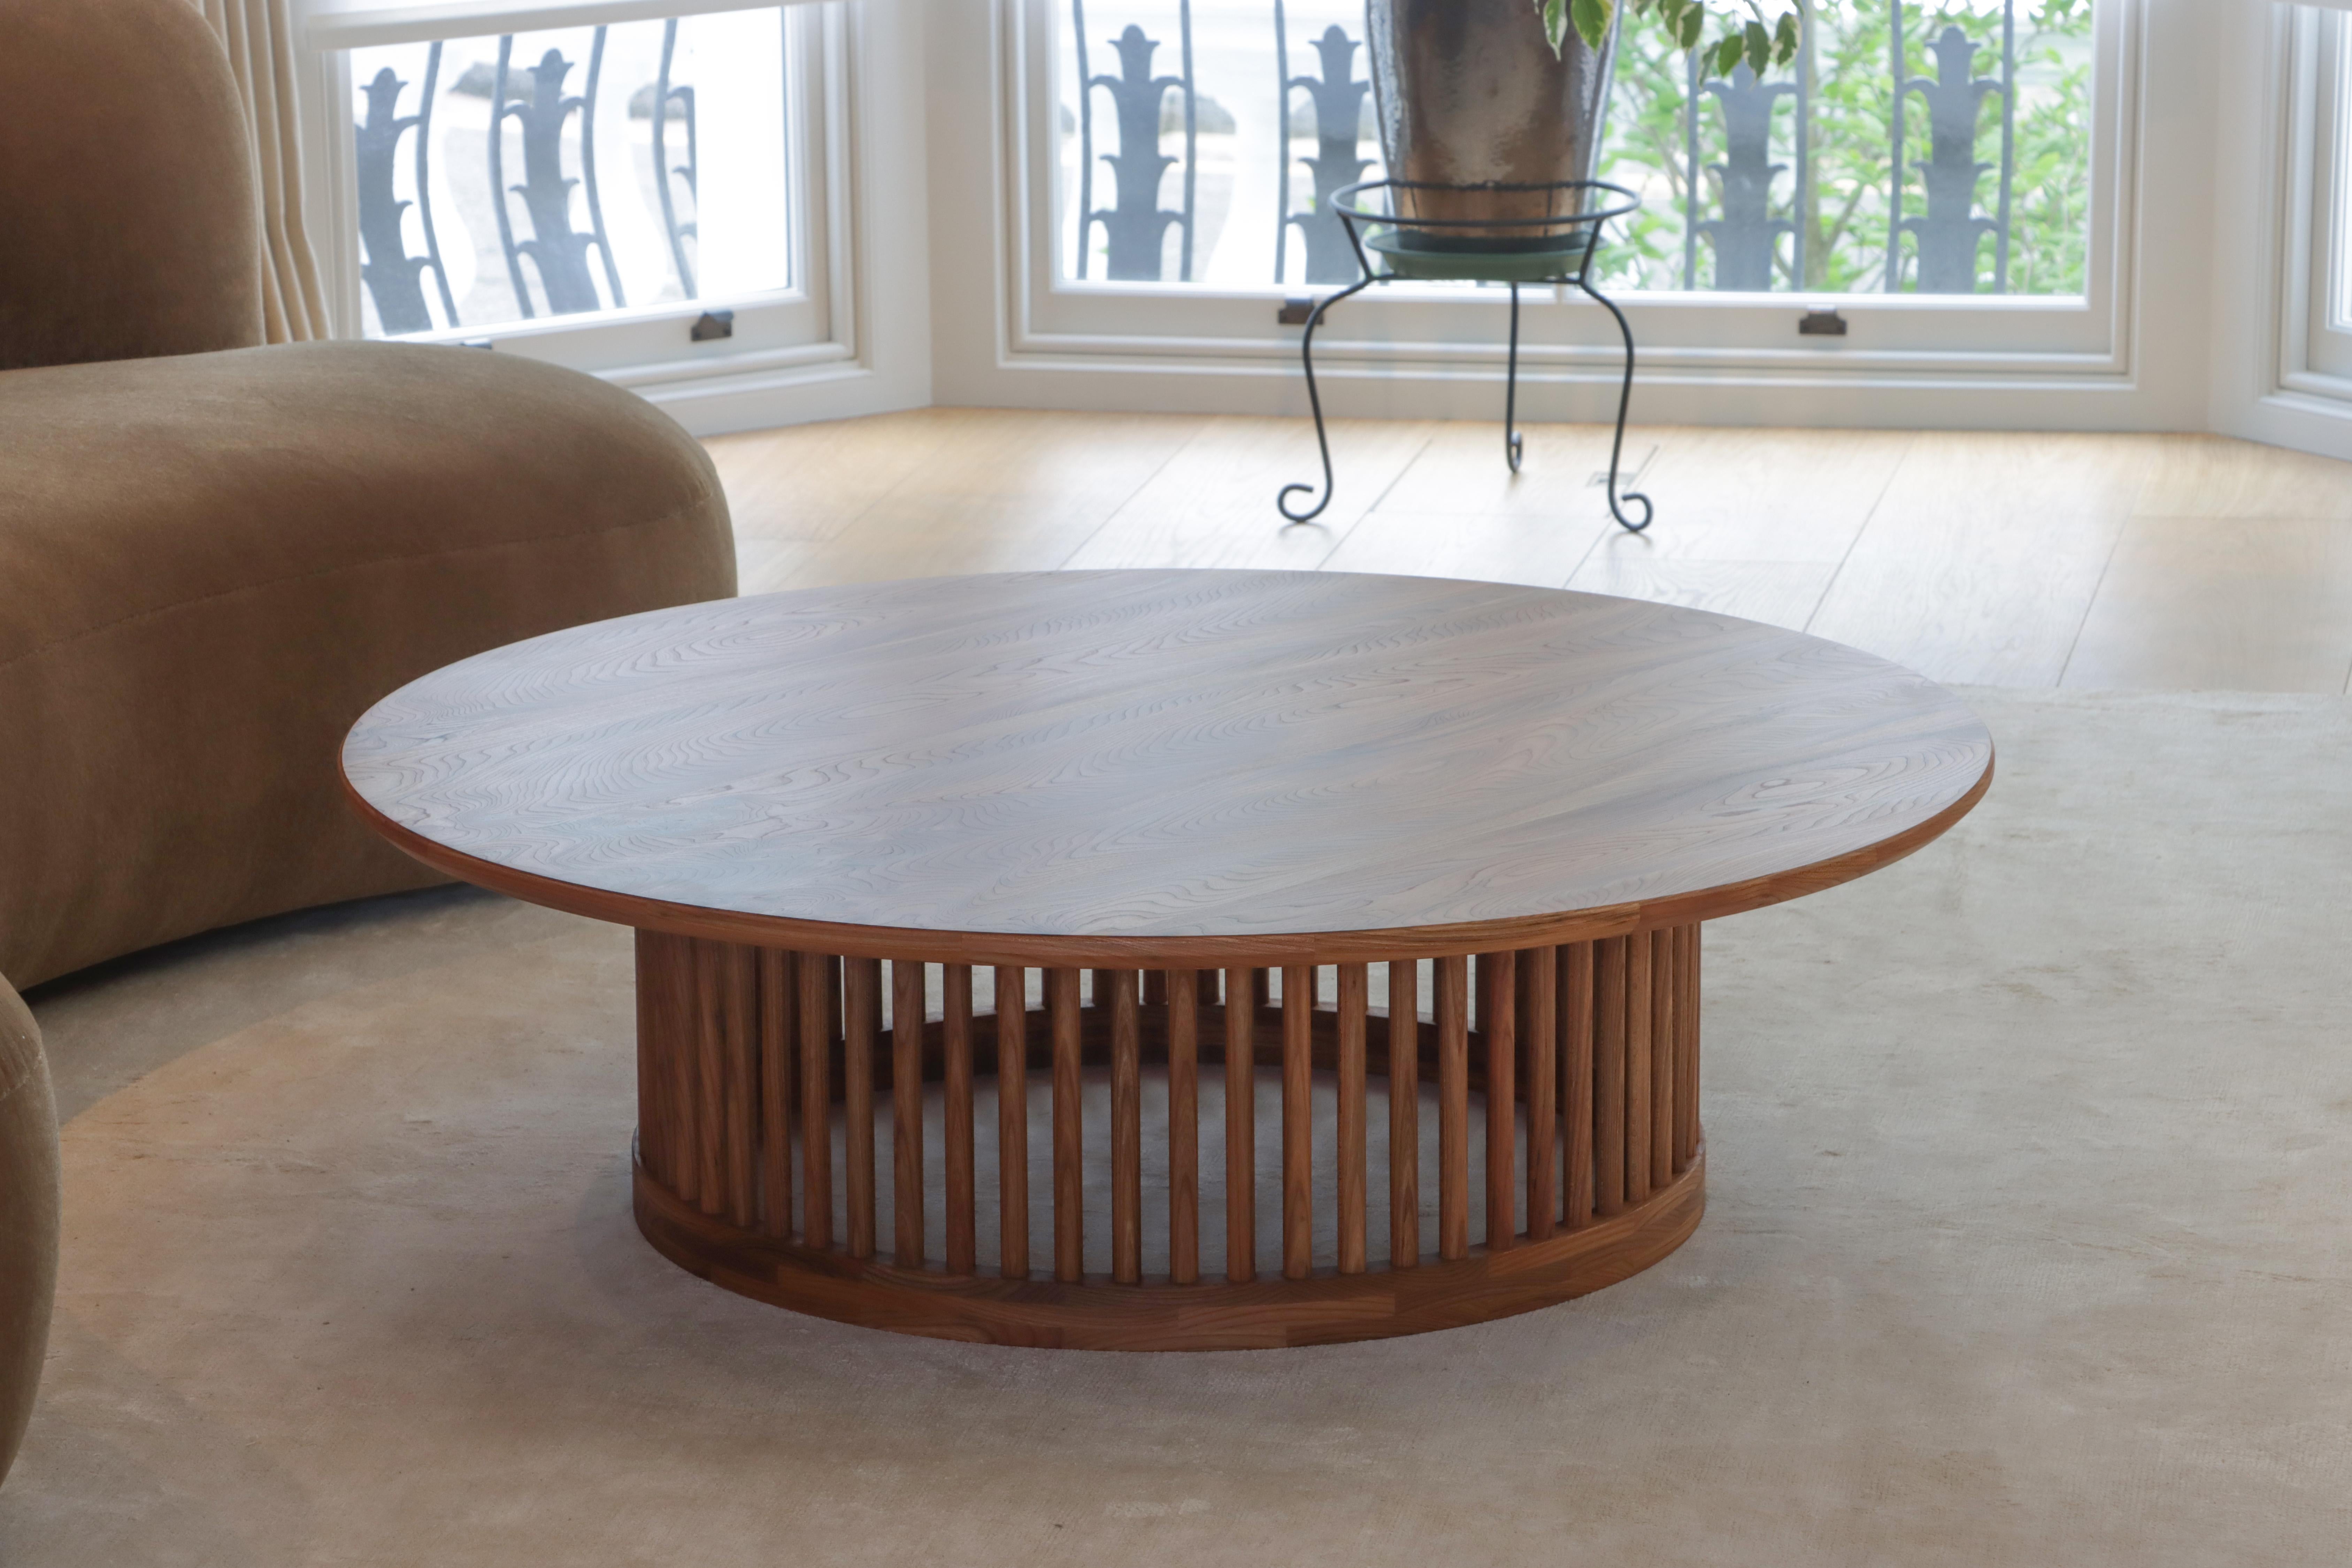 This coffee table is a bold centre piece for any living space. It’s made from the most beautiful English elm with striking character that will capture everyone’s attention. Your eyes go on a journey looking over all of the swirly grain with